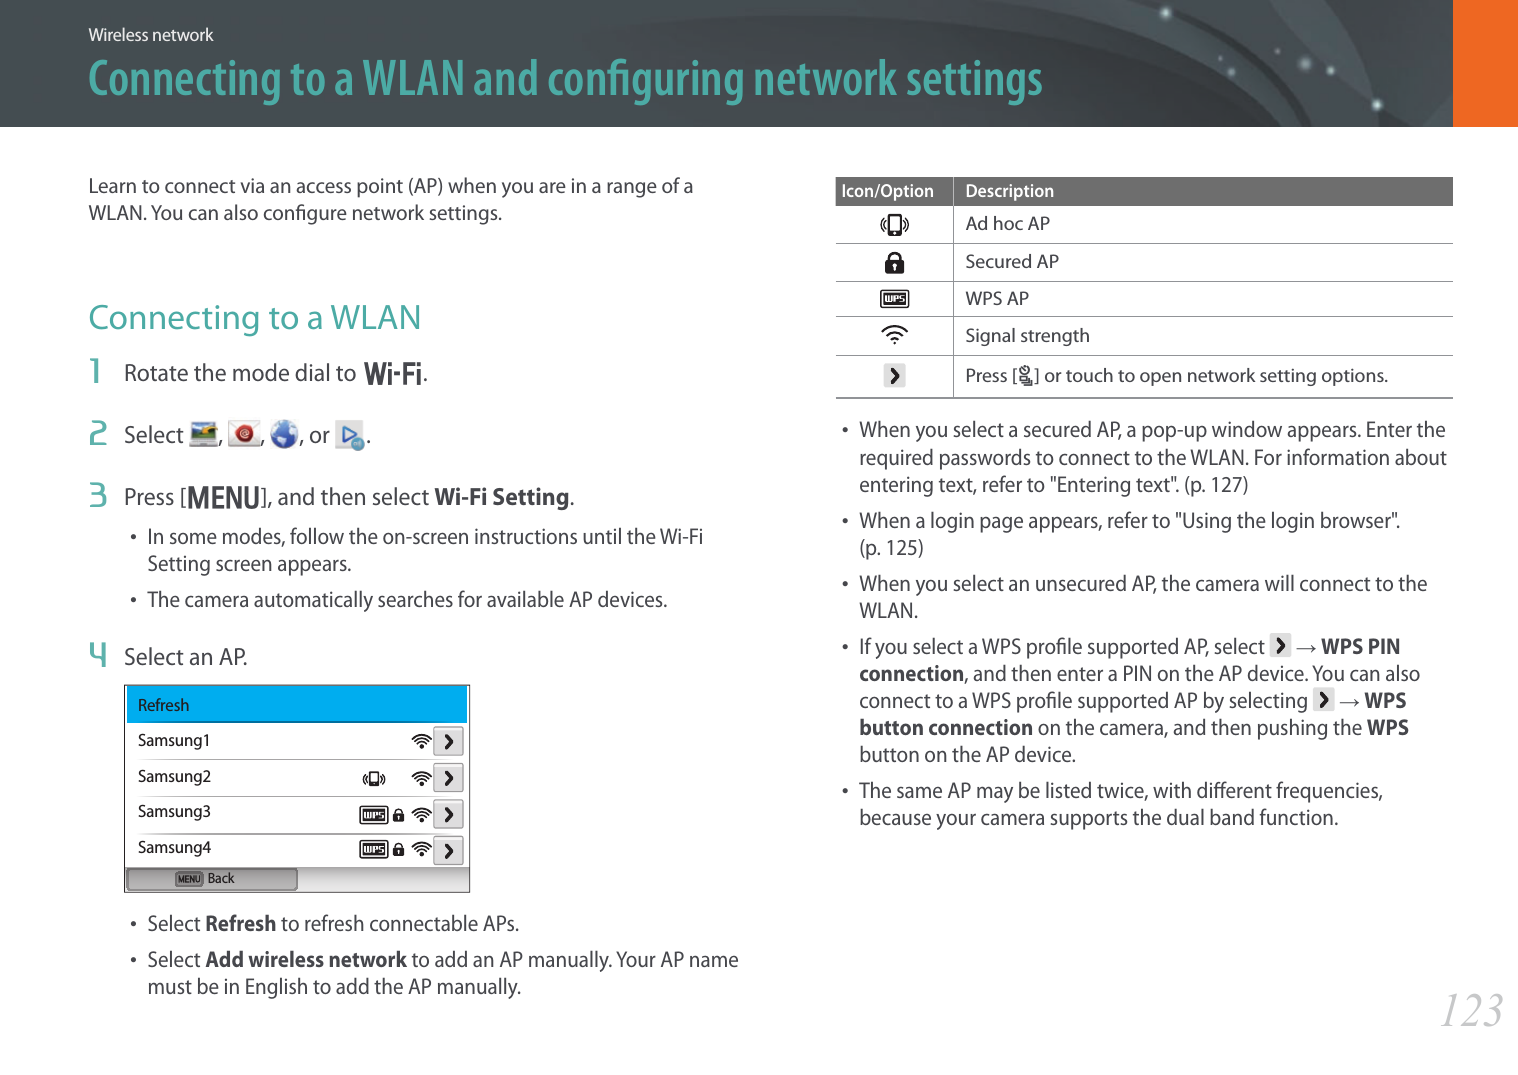 123Wireless networkConnecting to a WLAN and conguring network settingsLearn to connect via an access point (AP) when you are in a range of a WLAN. You can also congure network settings.Connecting to a WLAN1  Rotate the mode dial to B.2  Select  ,  , , or  .3  Press [m], and then select Wi-Fi Setting.• In some modes, follow the on-screen instructions until the Wi-Fi Setting screen appears.• The camera automatically searches for available AP devices.4  Select an AP.BackRefreshSamsung1Samsung2Samsung3Samsung4• Select Refresh to refresh connectable APs.• Select Add wireless network to add an AP manually. Your AP name must be in English to add the AP manually.Icon/Option DescriptionAd hoc APSecured APWPS APSignal strengthPress [C] or touch to open network setting options.• When you select a secured AP, a pop-up window appears. Enter the required passwords to connect to the WLAN. For information about entering text, refer to &quot;Entering text&quot;. (p. 127)• When a login page appears, refer to &quot;Using the login browser&quot;.  (p. 125)• When you select an unsecured AP, the camera will connect to the WLAN.• If you select a WPS prole supported AP, select   → WPS PIN connection, and then enter a PIN on the AP device. You can also connect to a WPS prole supported AP by selecting   → WPS button connection on the camera, and then pushing the WPS button on the AP device.• The same AP may be listed twice, with dierent frequencies, because your camera supports the dual band function.